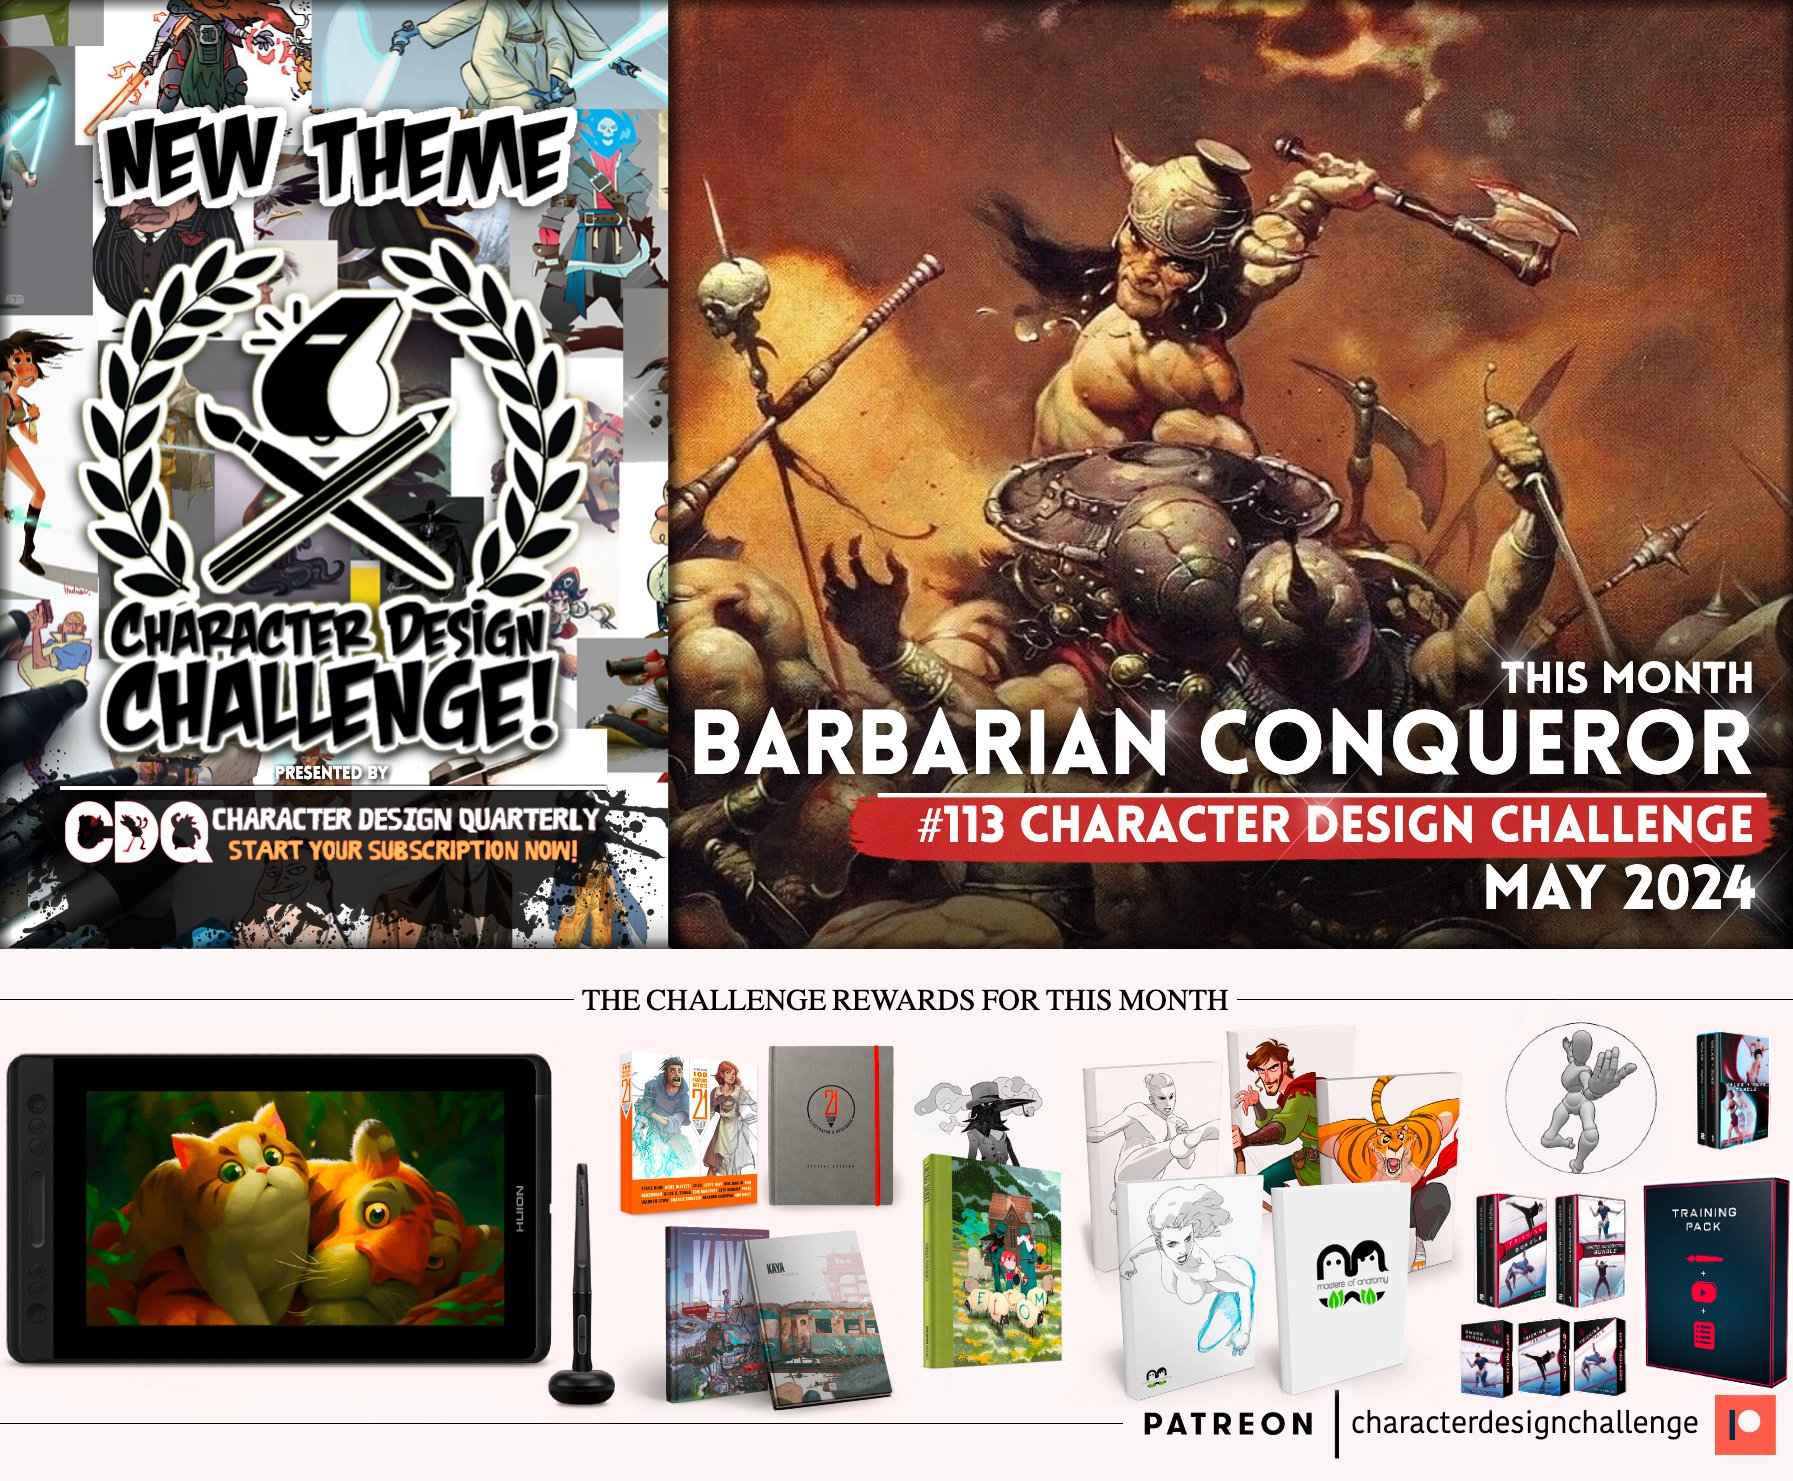 The new Theme of the Month for the #CDChallenge is #BarbarianConqueror! - Use both hashtags, and tag our IG page in your post ( @characterdesignchallenge ) to register your participation! OR join our Facebook Group to upload your work directly, share